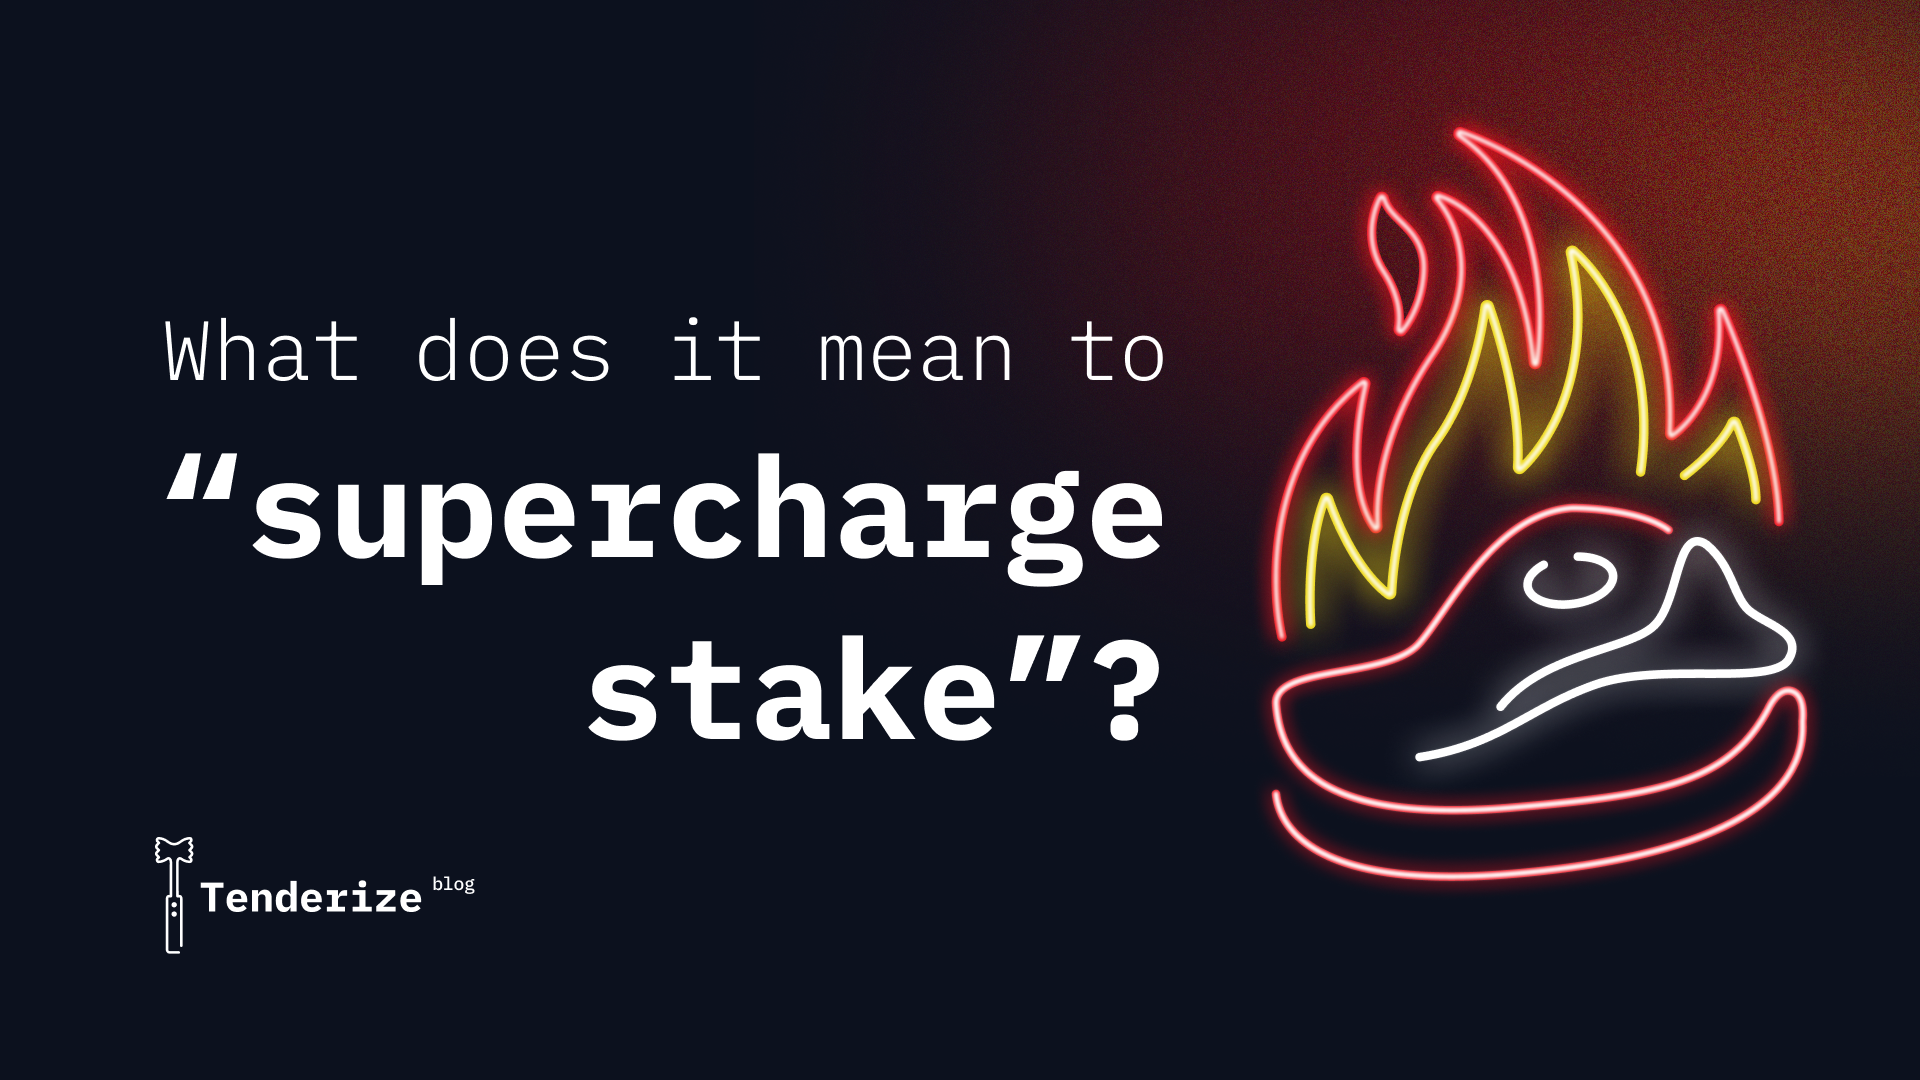 What does it mean to “supercharge stake?”